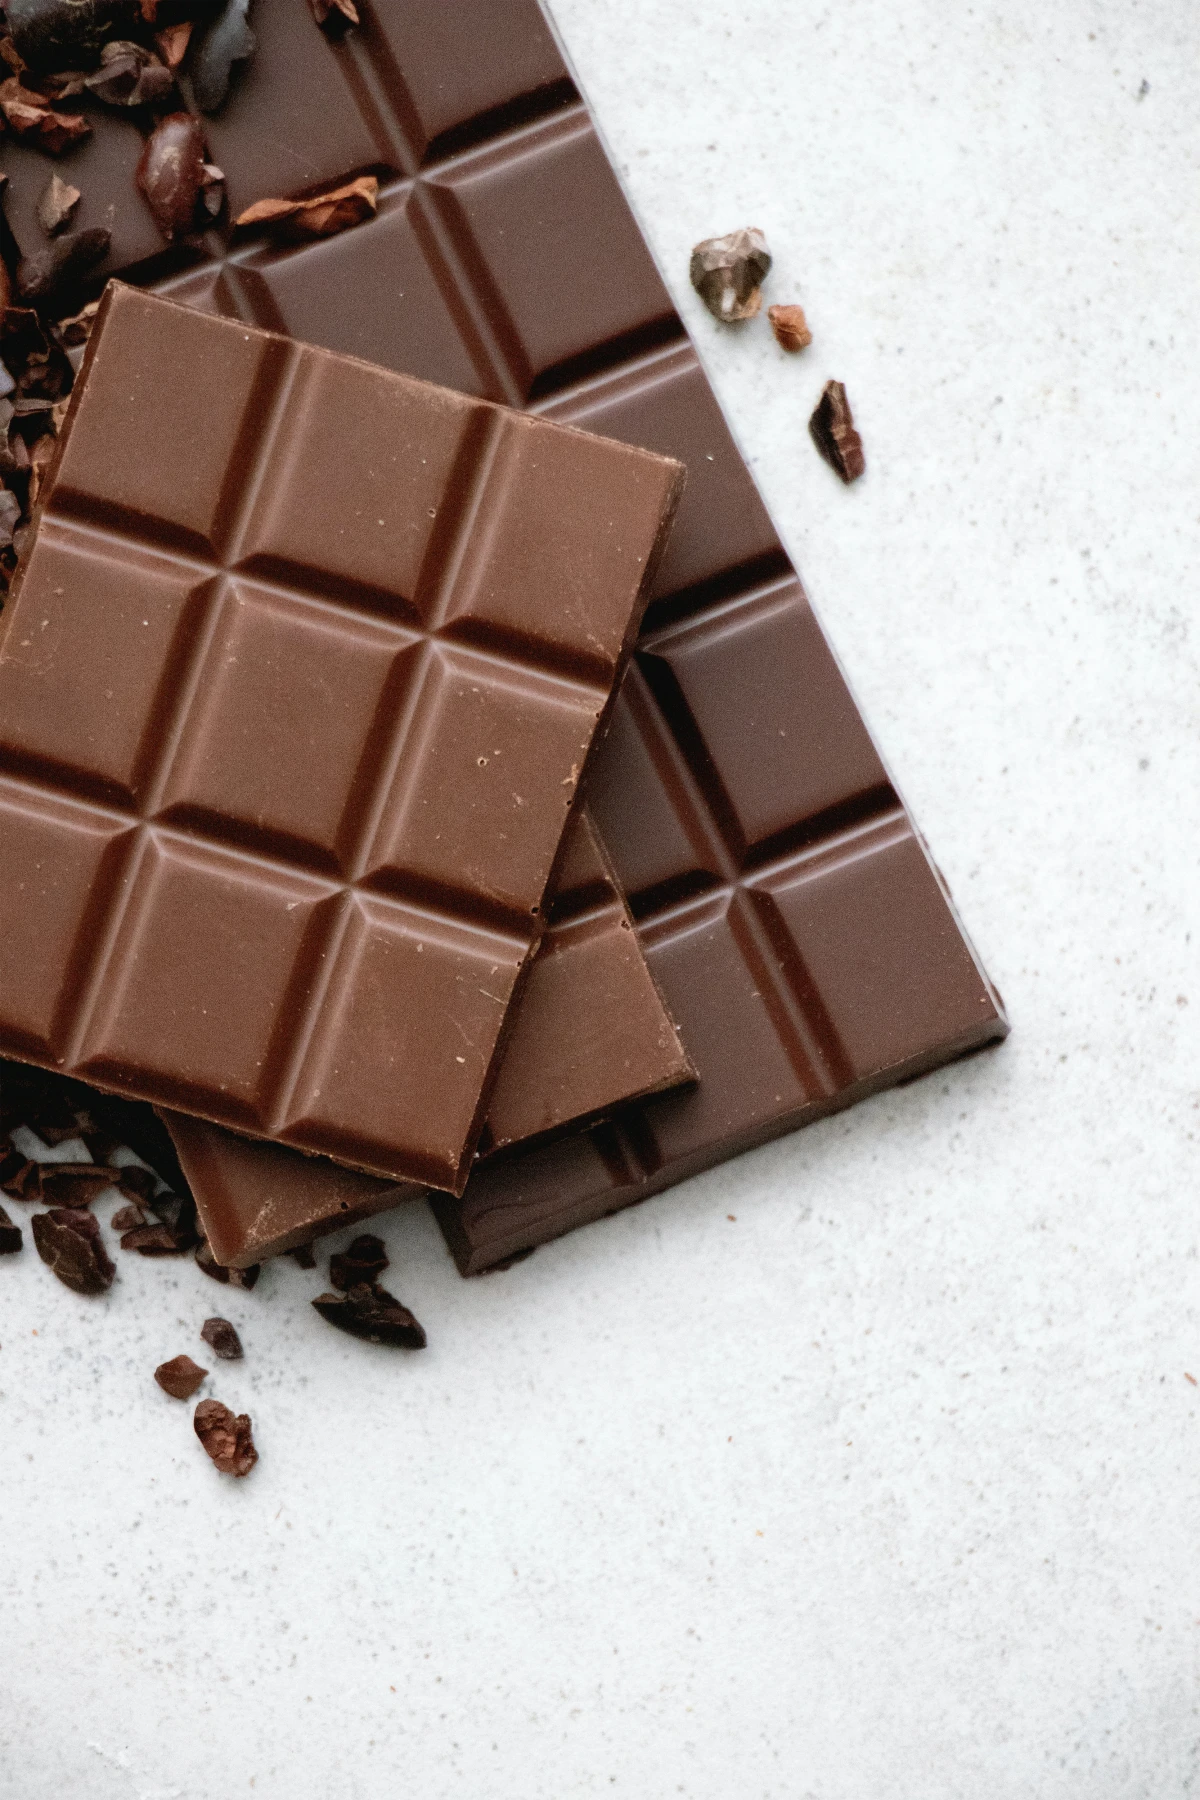 foods that are toxic to cats chocolate=bars on top of each other